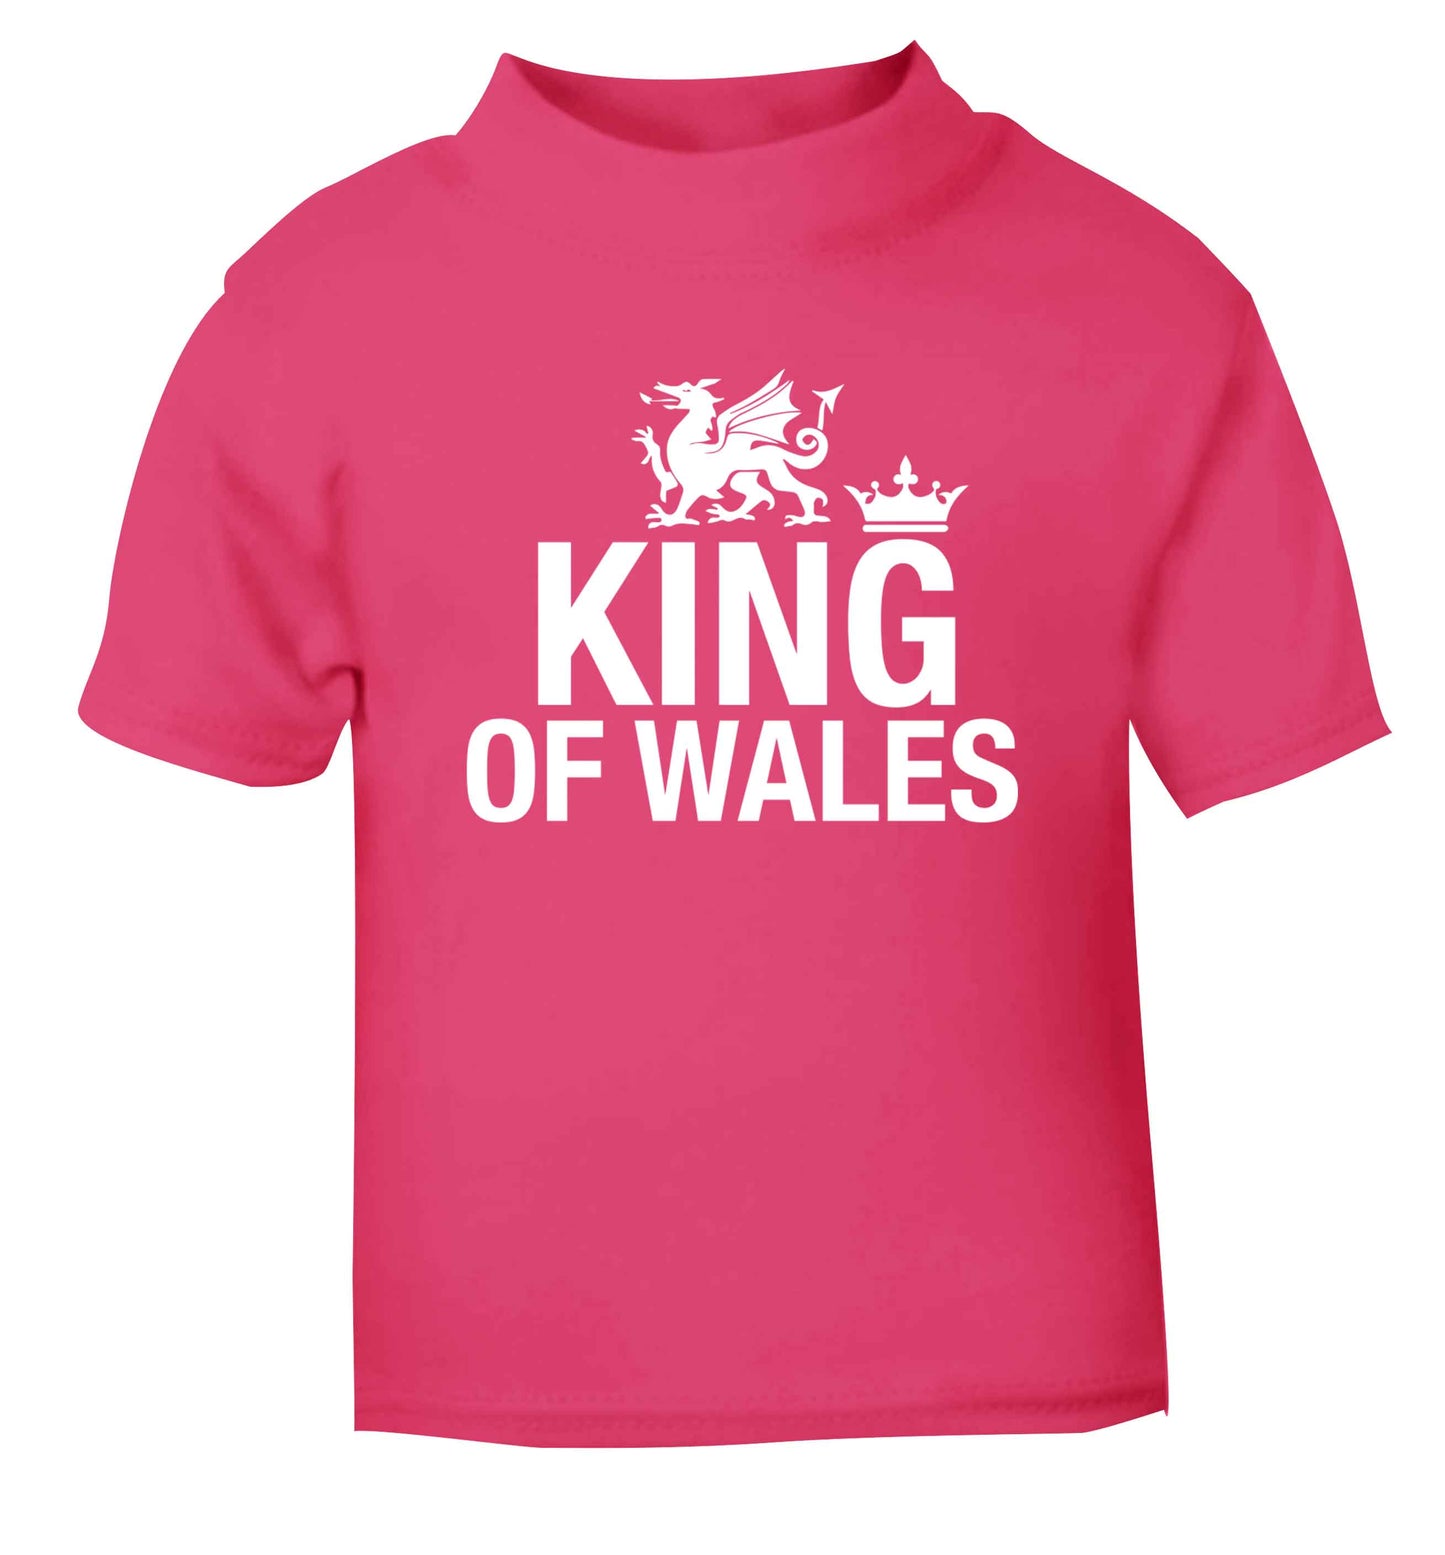 King of Wales pink Baby Toddler Tshirt 2 Years